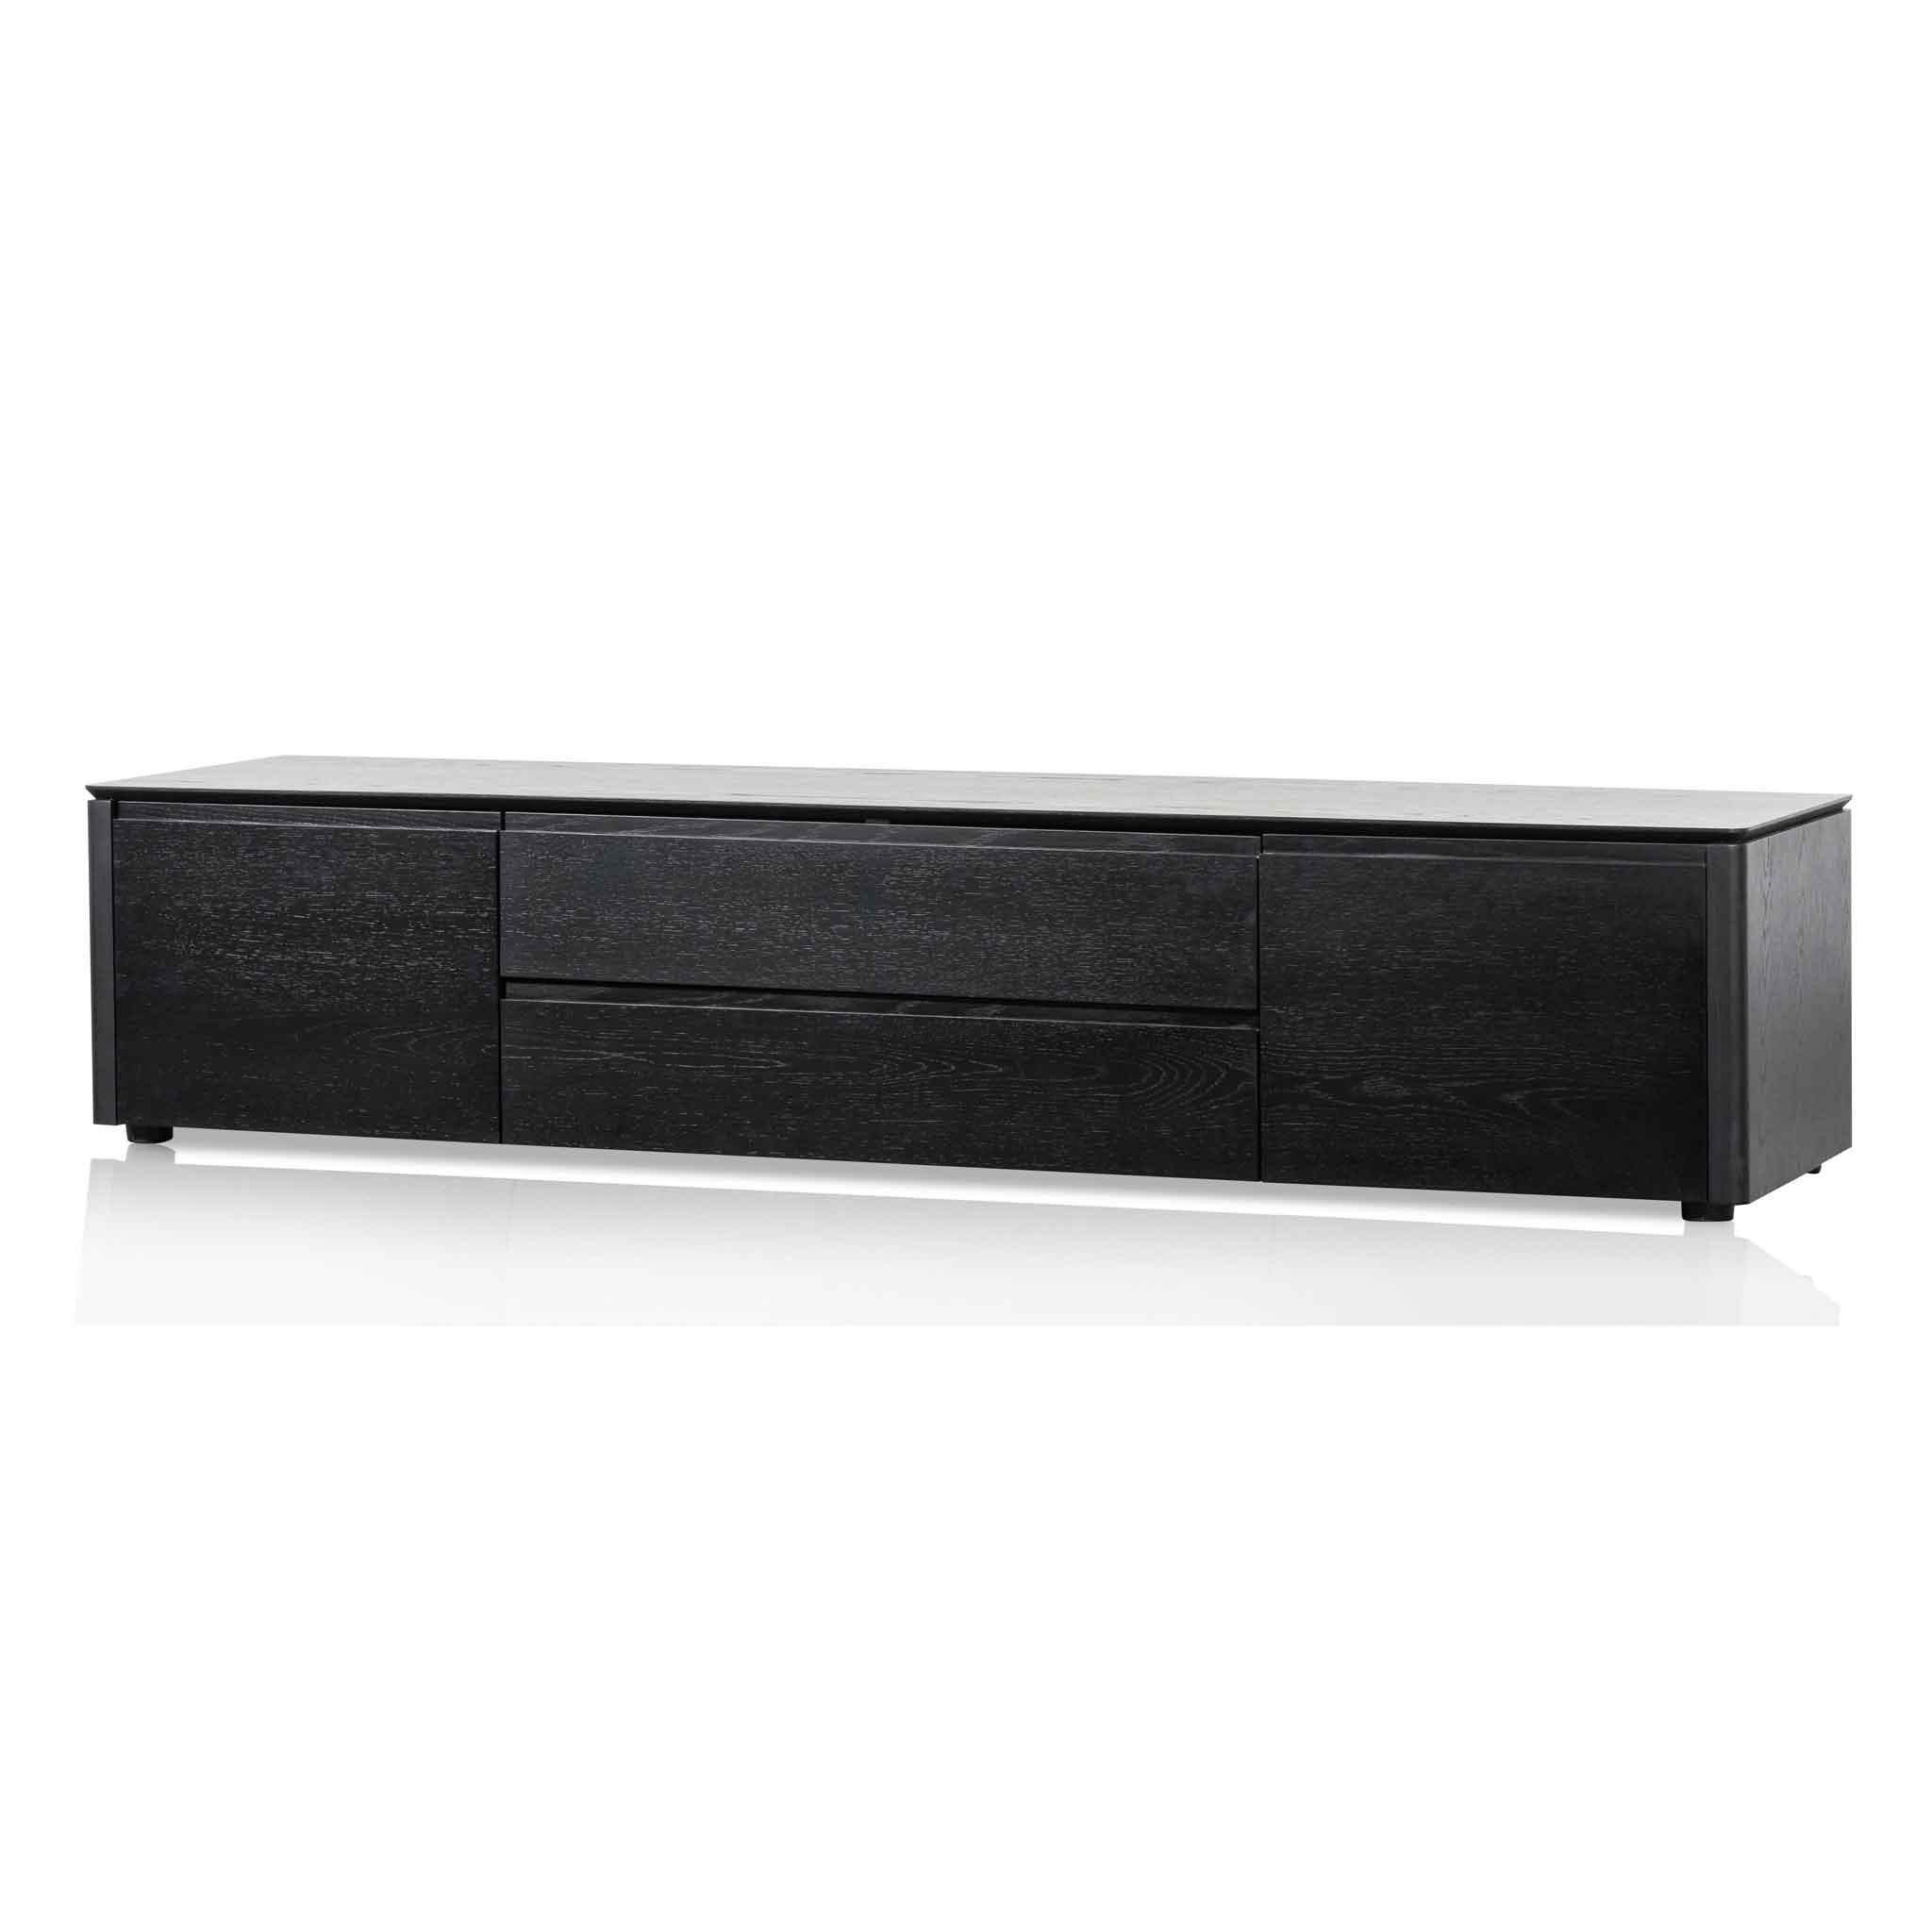 Carter Entertainment TV Stand with Middle Drawer - Black Ash Wood - TV Units